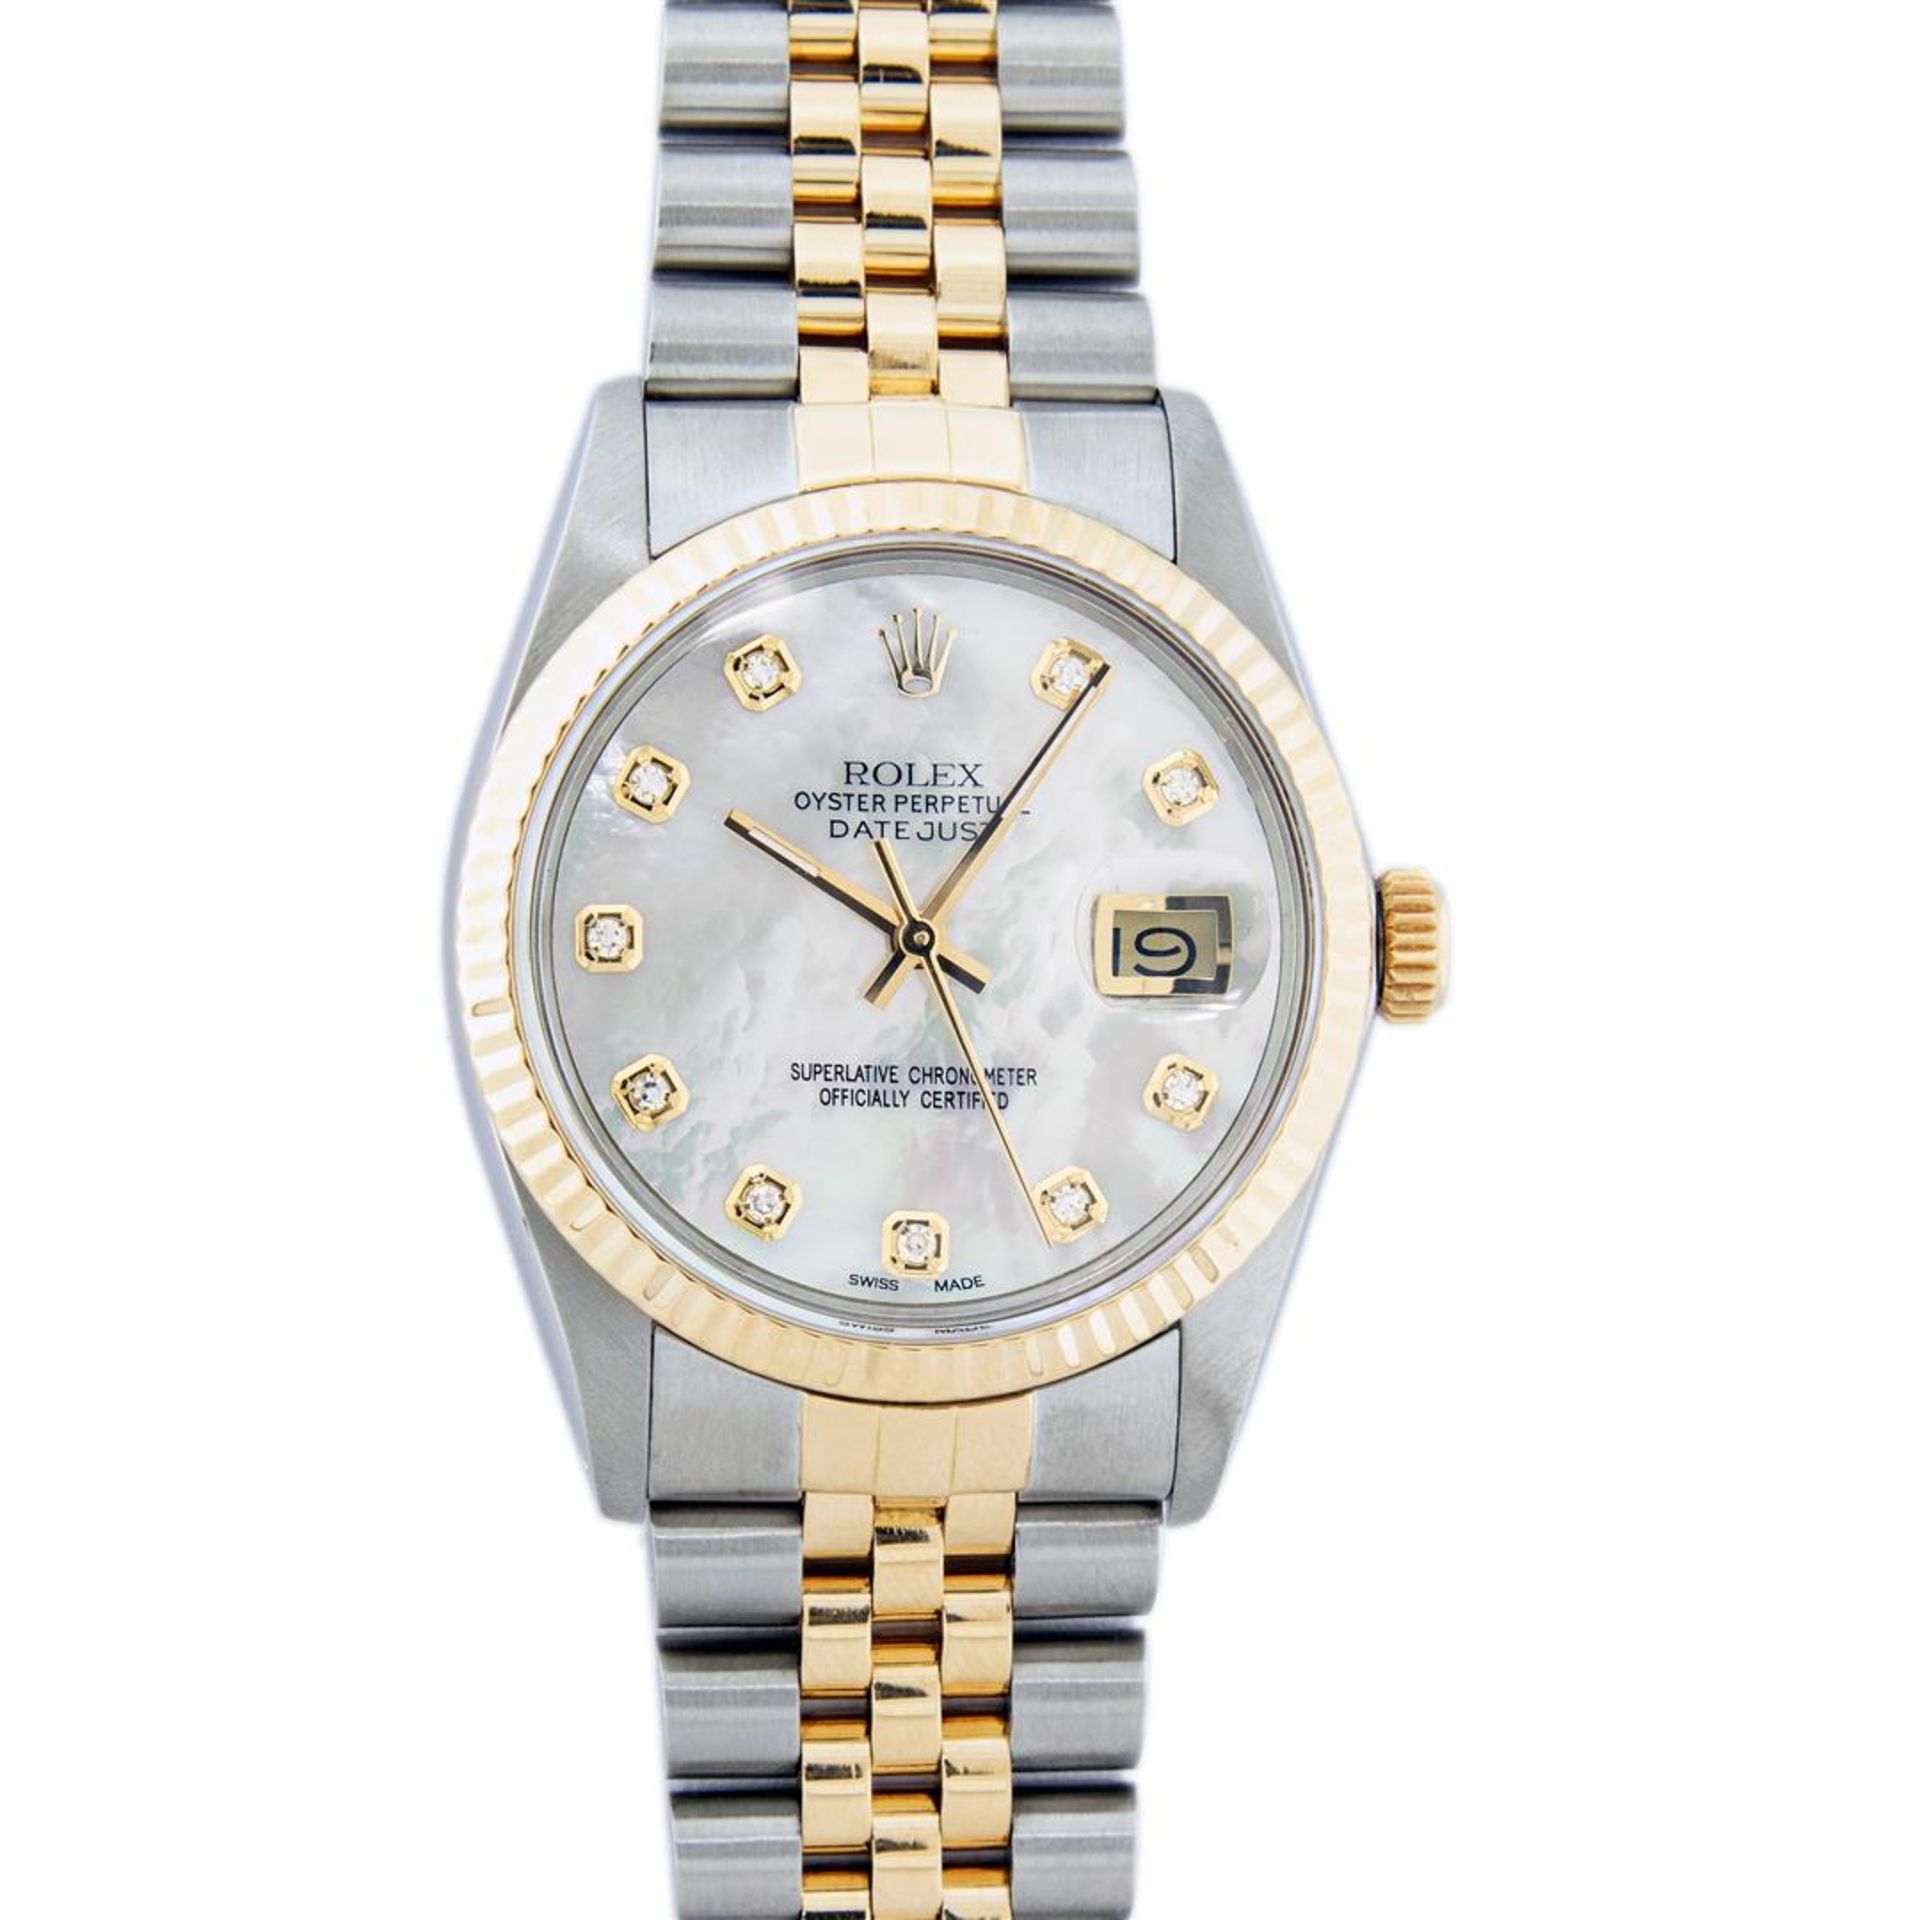 Rolex Mens 2 Tone Mother Of Pearl VS Diamond 36MM Datejust Wristwatch - Image 4 of 18